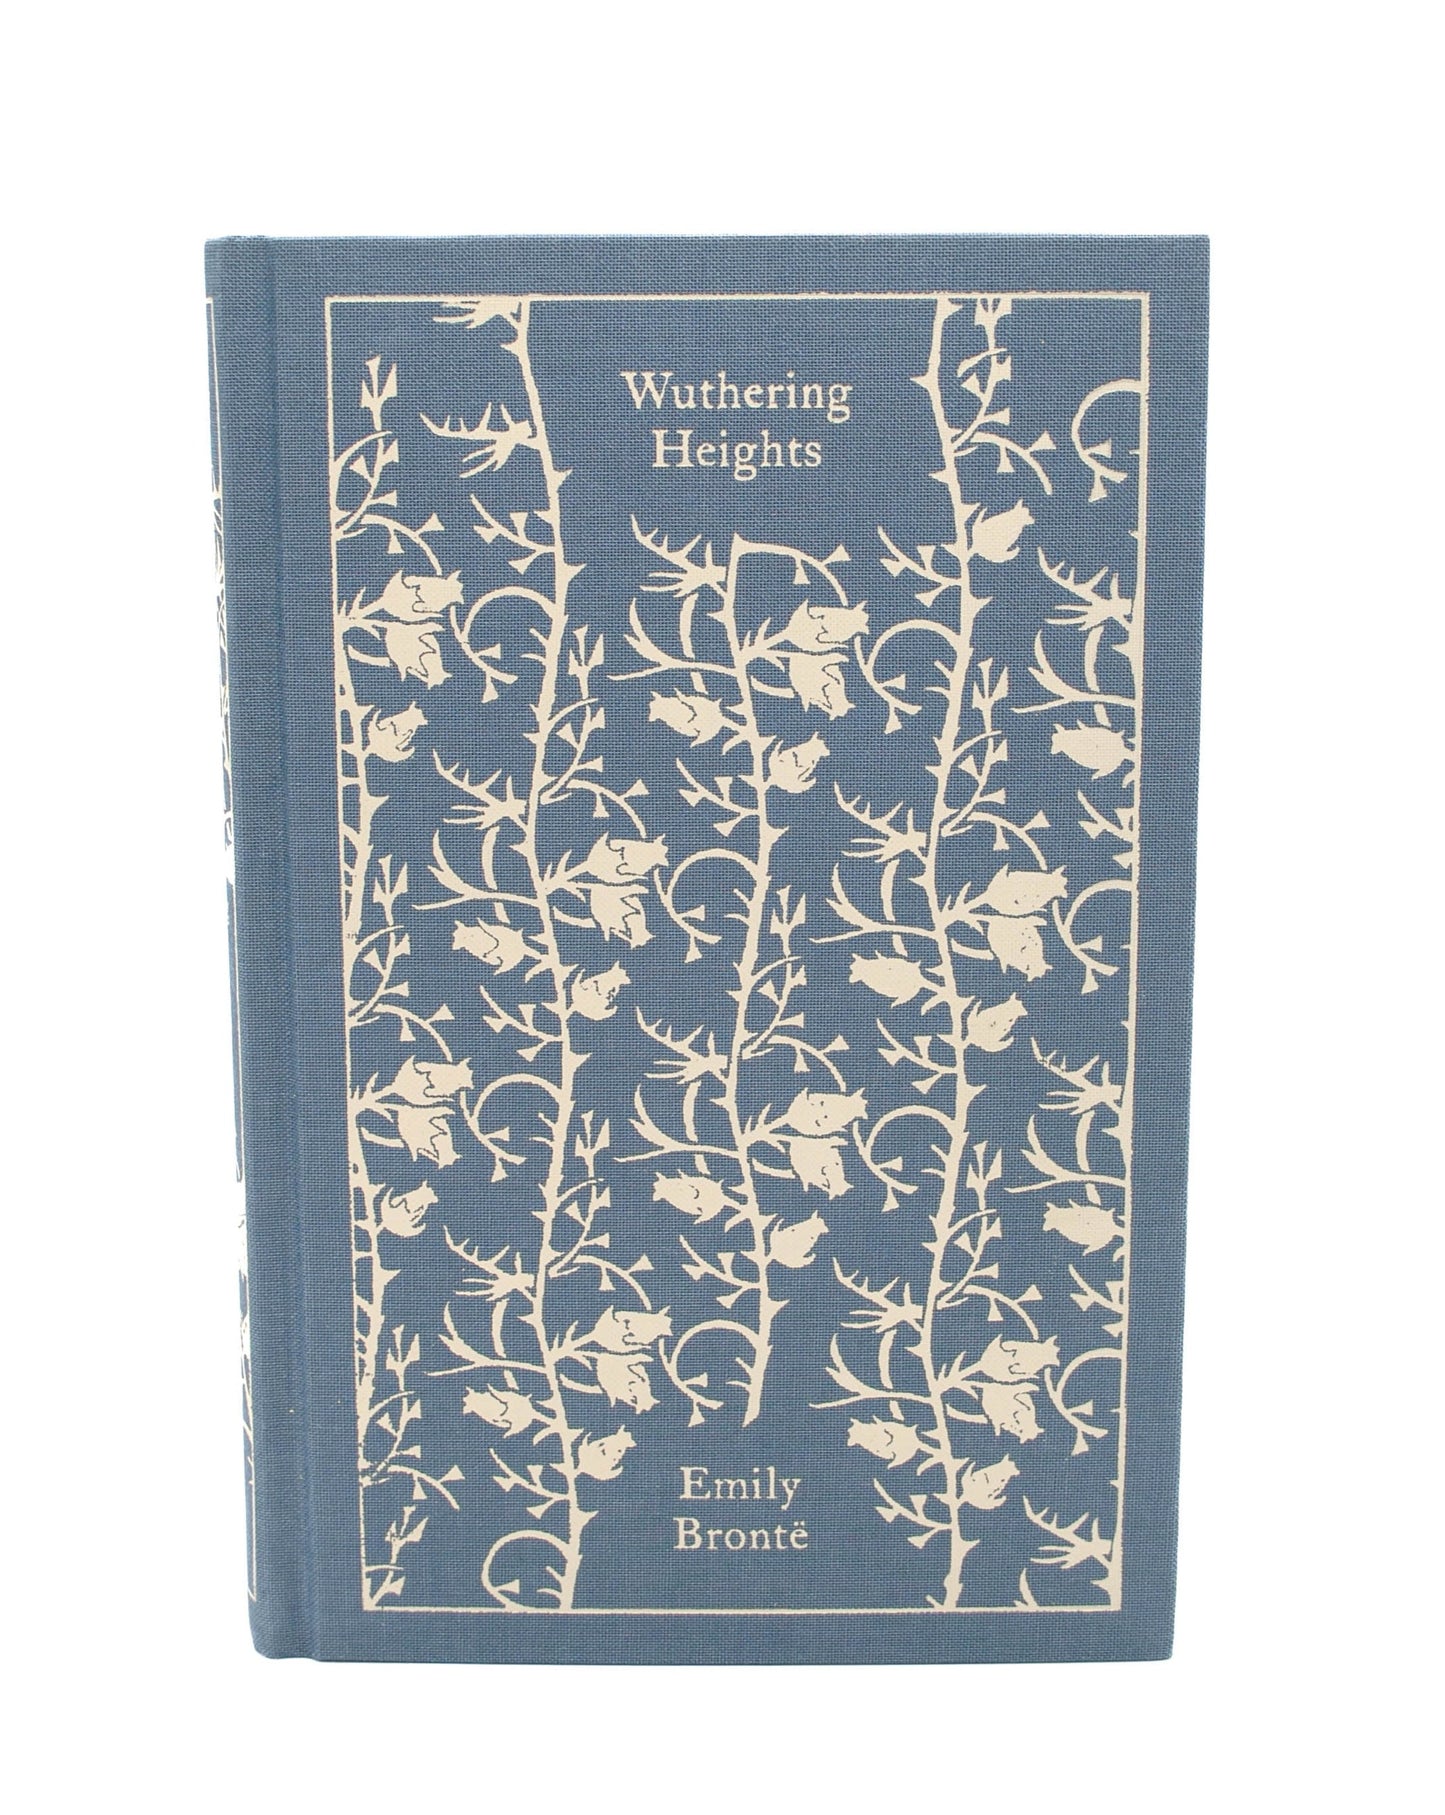 Wuthering Heights (Penguin Clothbound Classics) by Emily Bronte